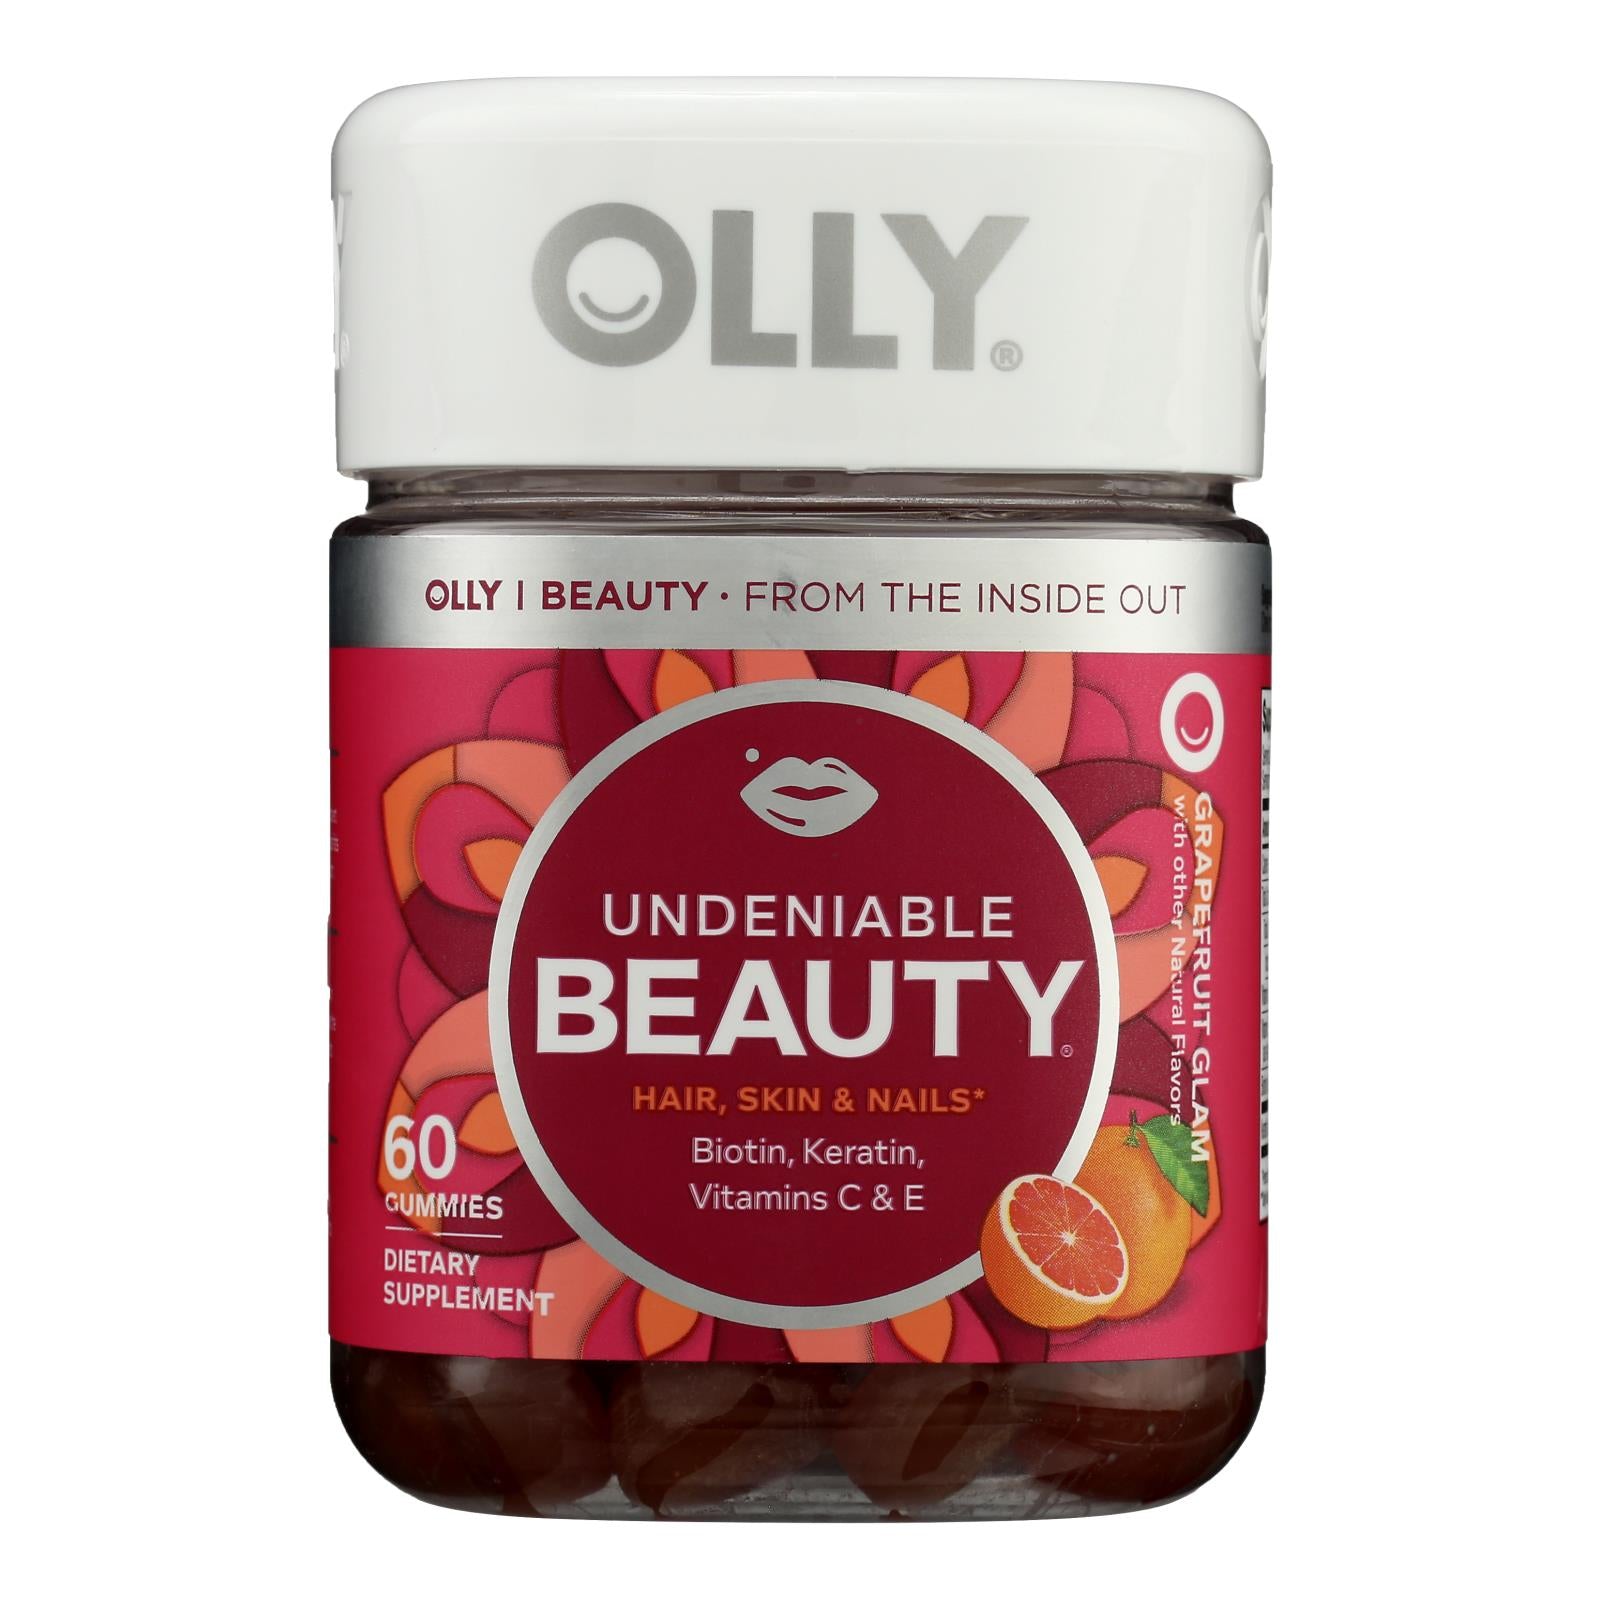 Olly Gummy Supplement Unbelievable Beauty